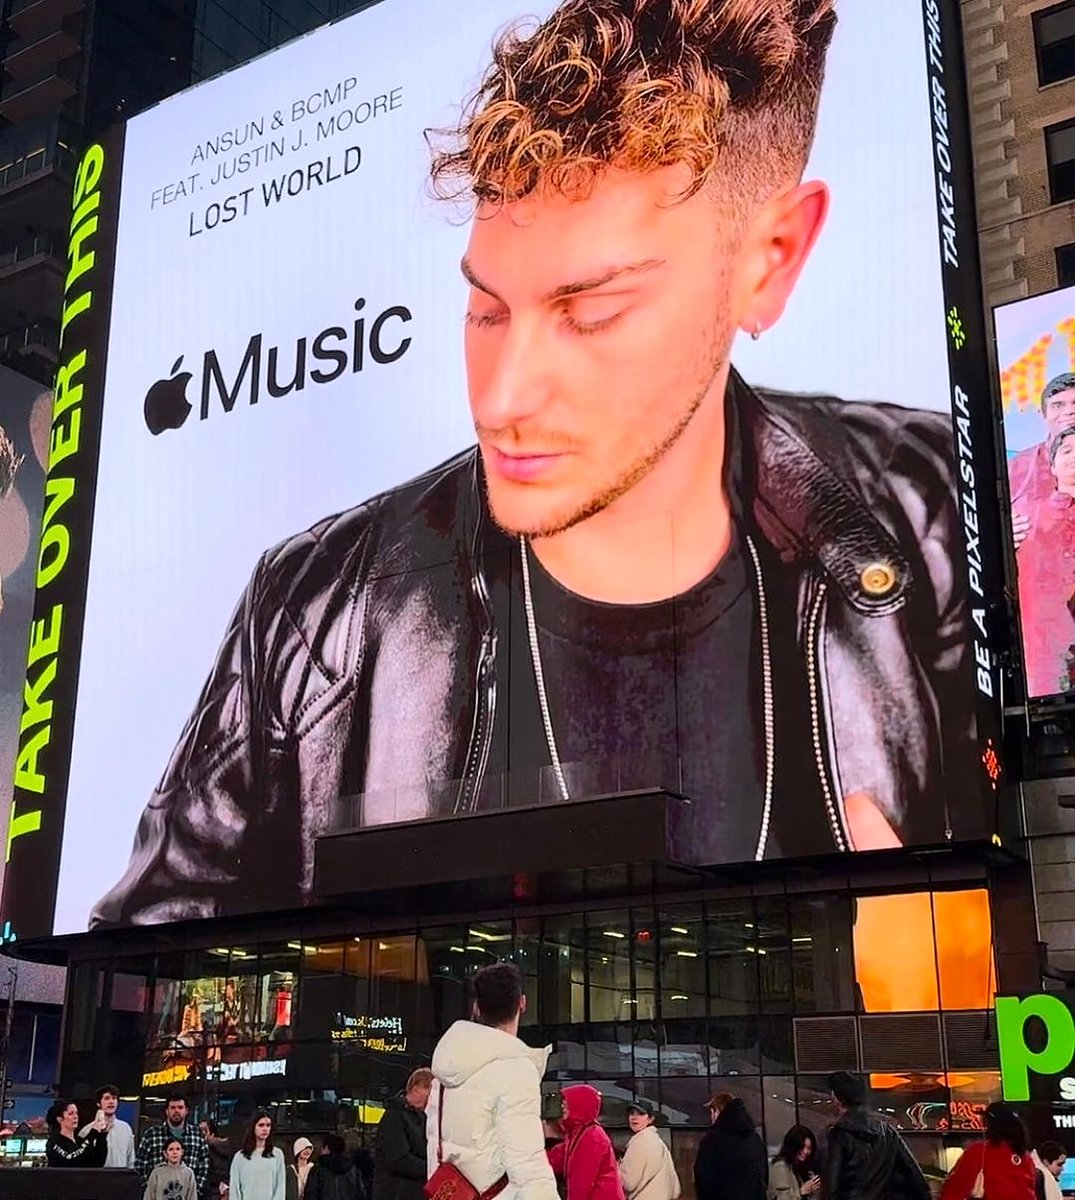 .@kiffixhq Early Adopter @bcmpmusic_ lighting up a Billboard in Time Square 🔥🔥 Join the waiting list at kiffix.com 🎶🎧